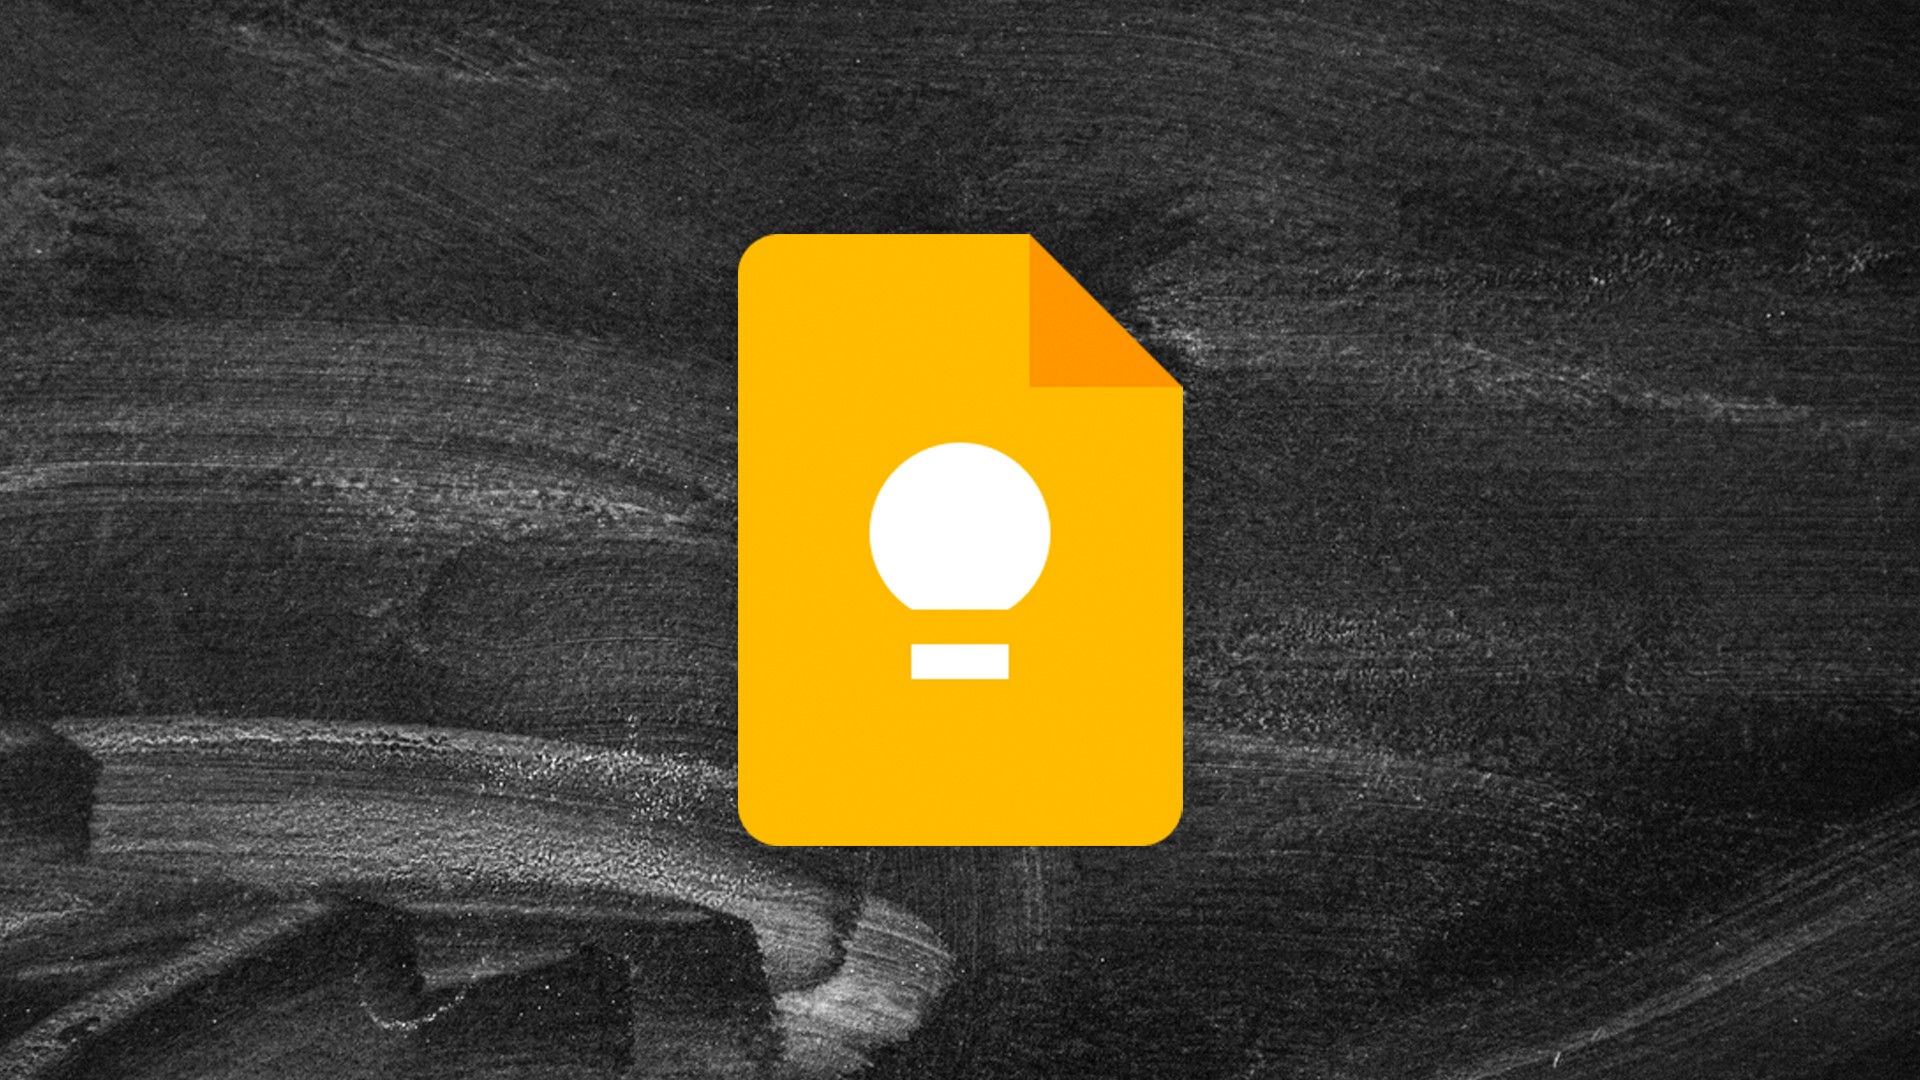 Google Keep and Maps are back compatible with Wear OS 2
